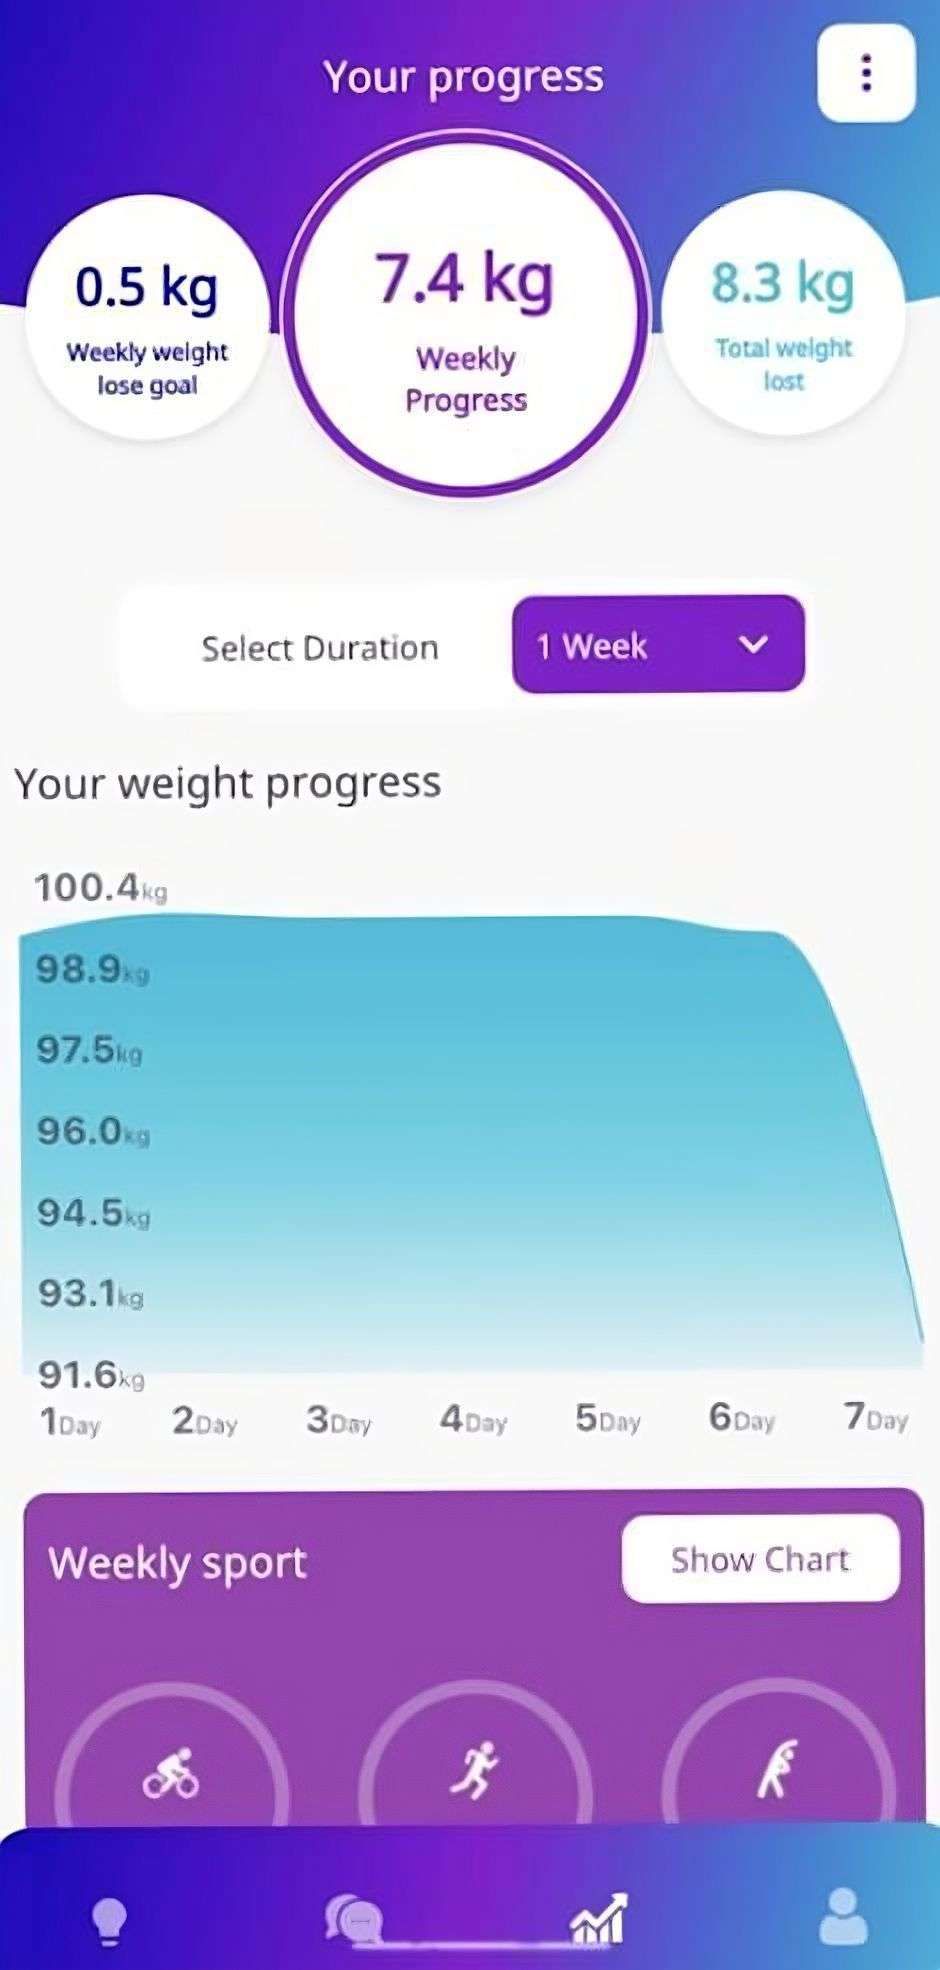 Weighlos lets you set targets in percentages or kilograms so that users can compete fairly